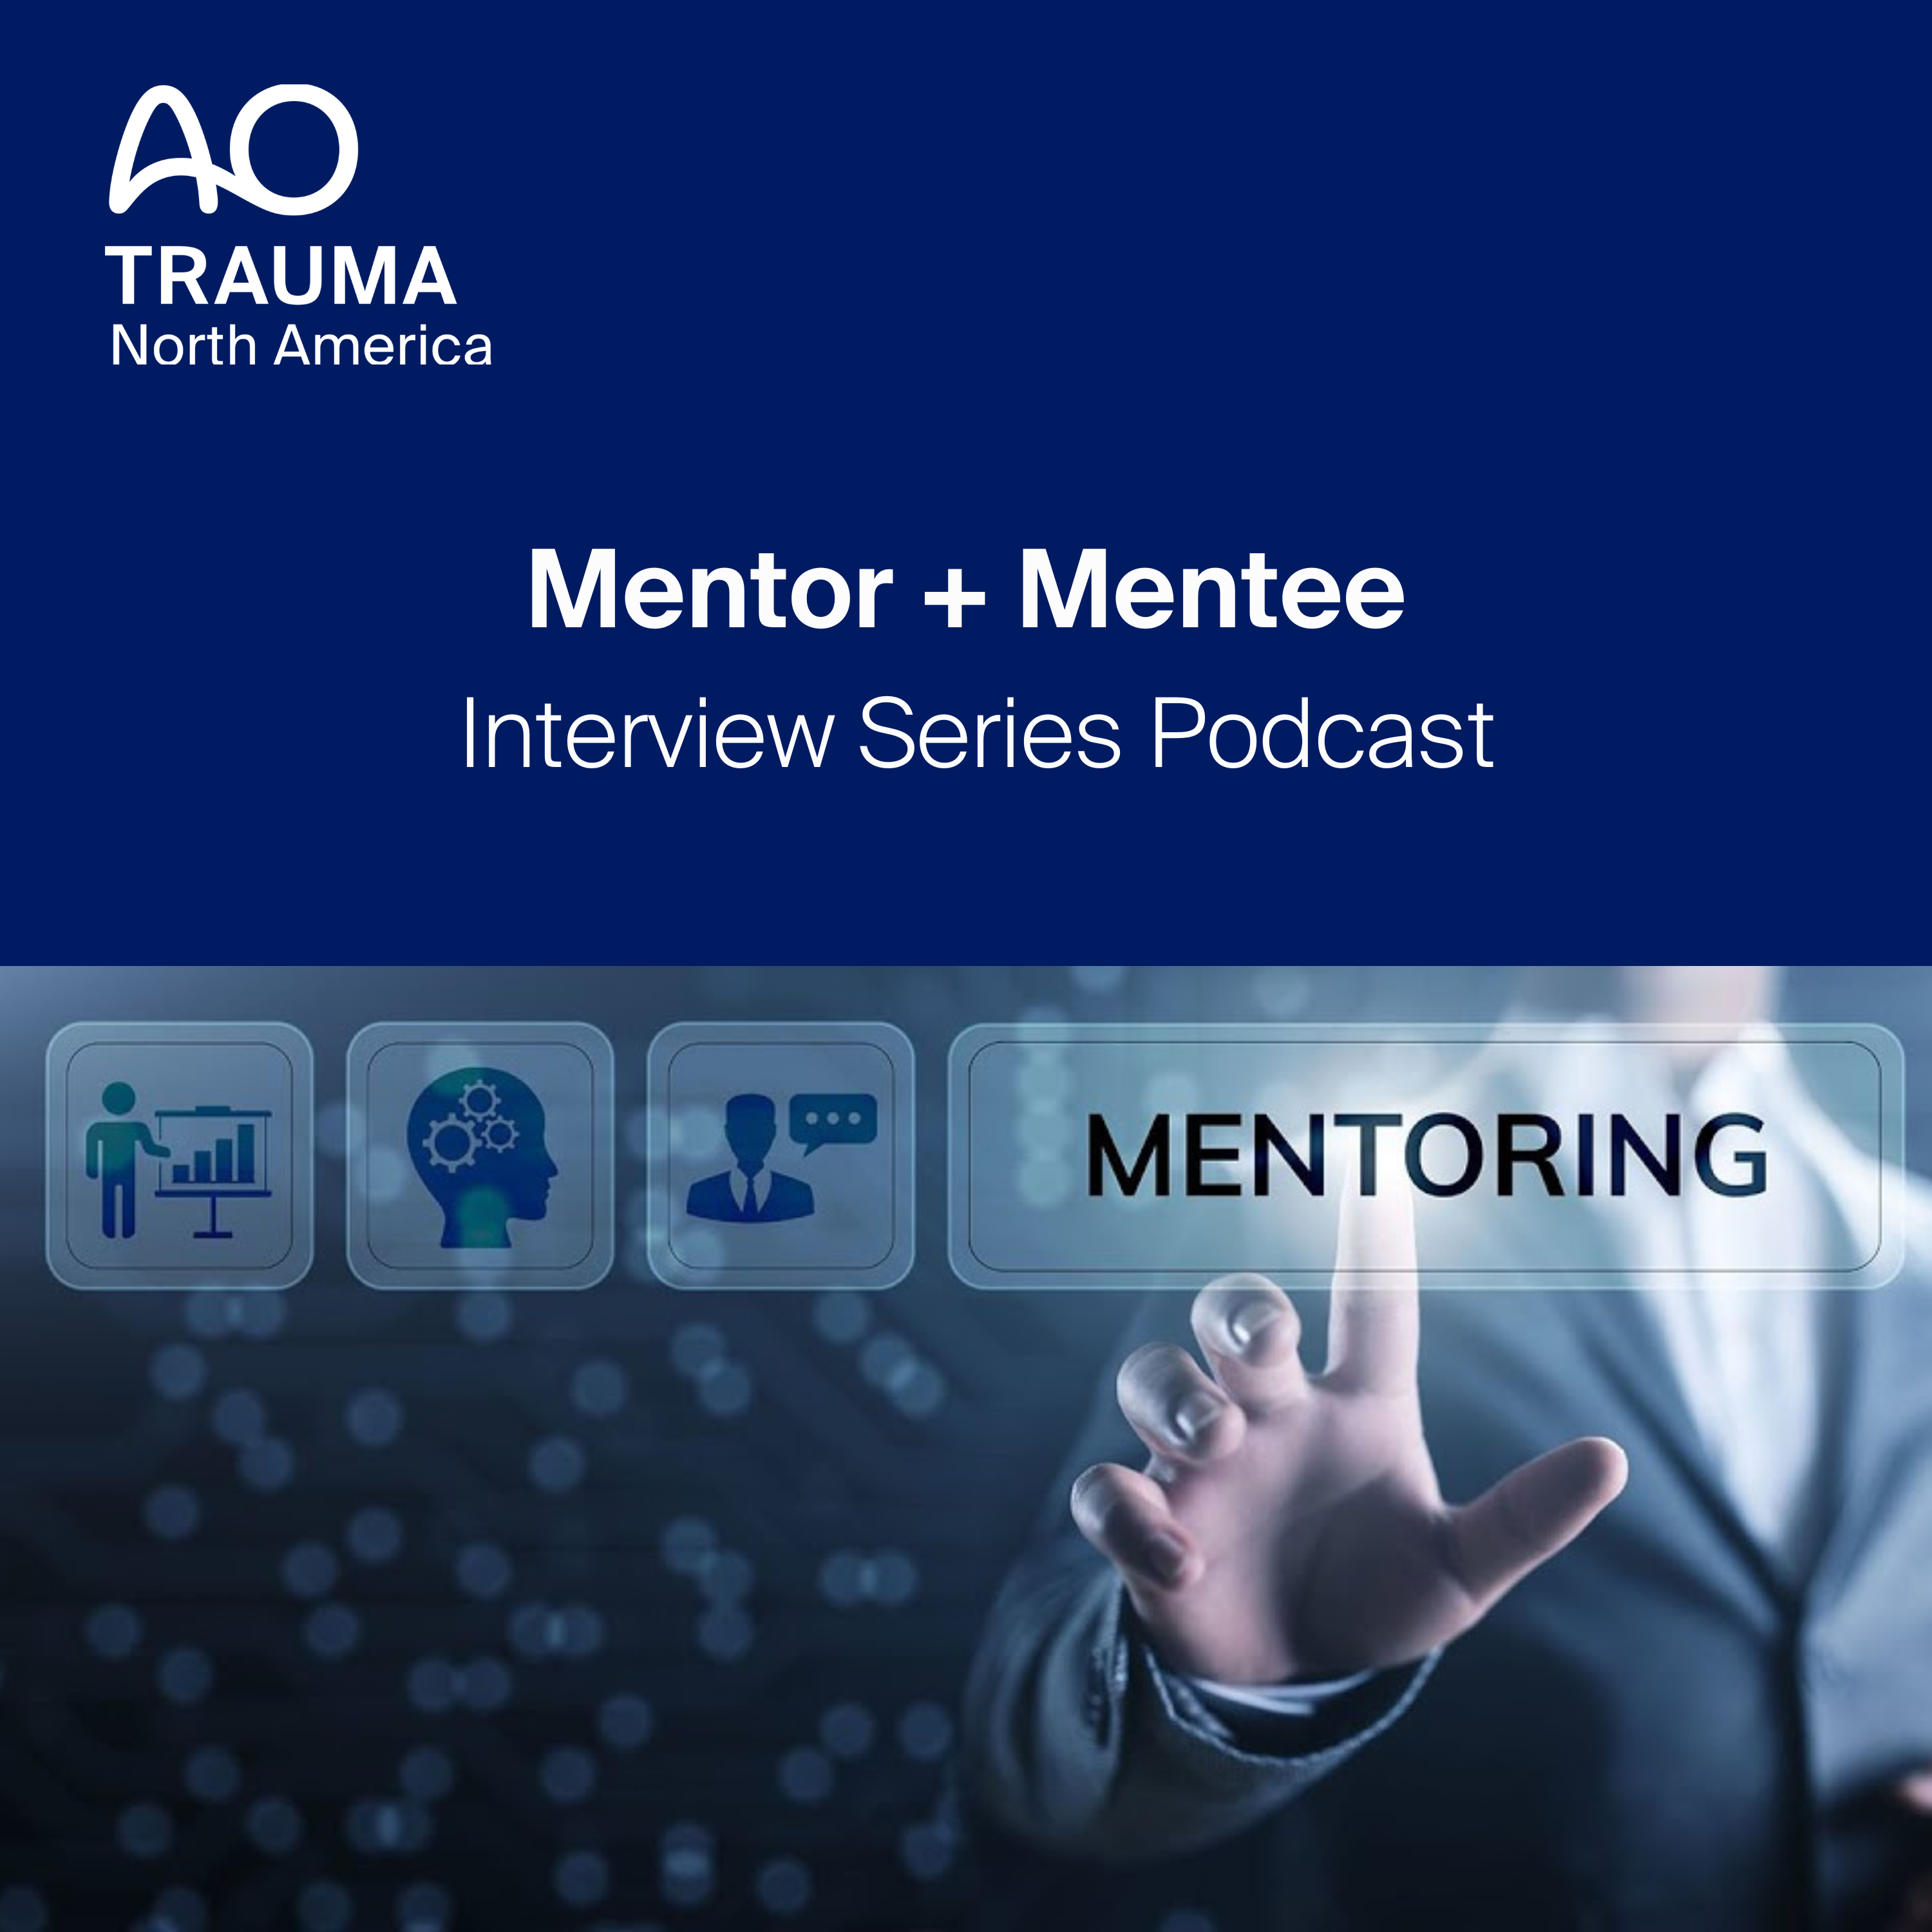 New Podcast: Mentor + Mentee Interview Series